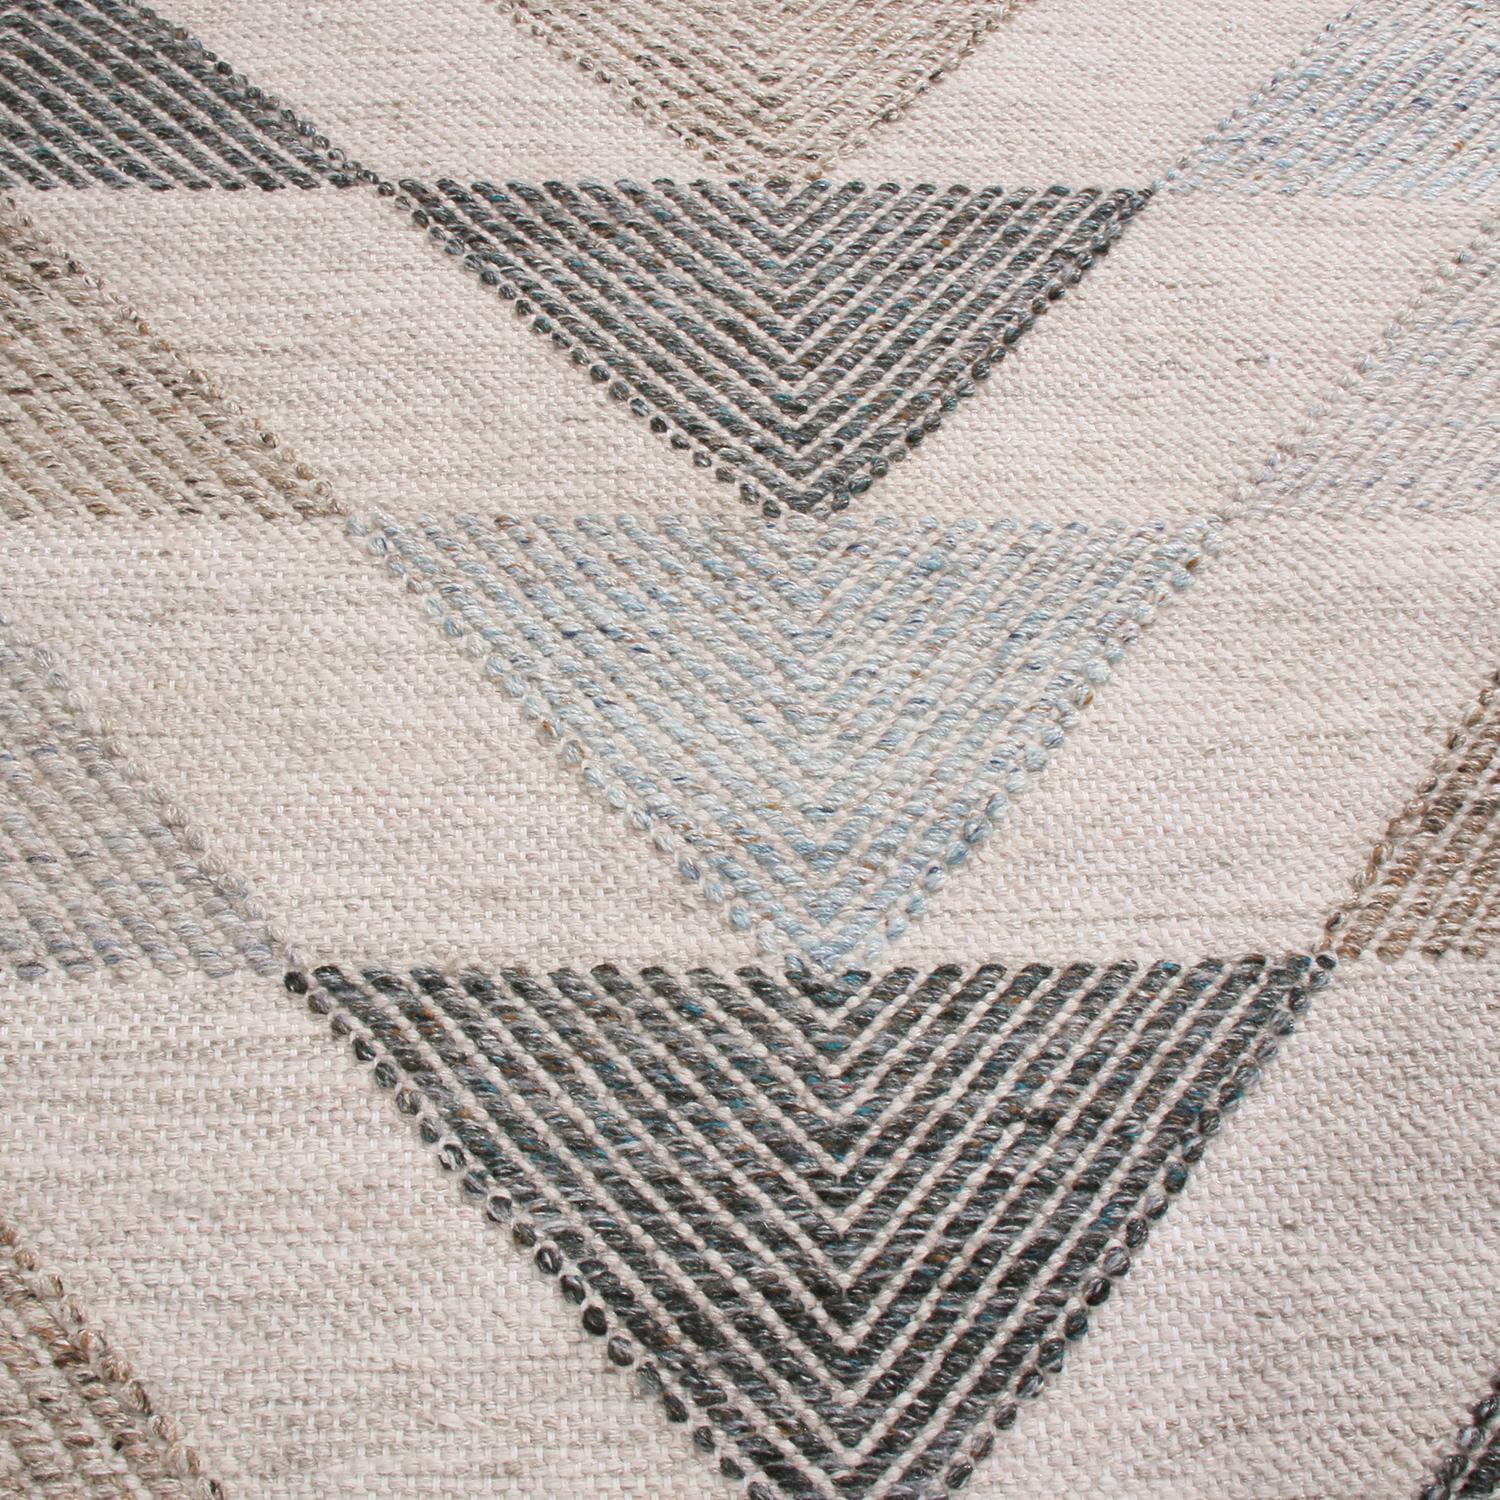 Indian Rug & Kilim’s Scandinavian Inspired Moroccan-Style Beige & Blue Polyester Rug